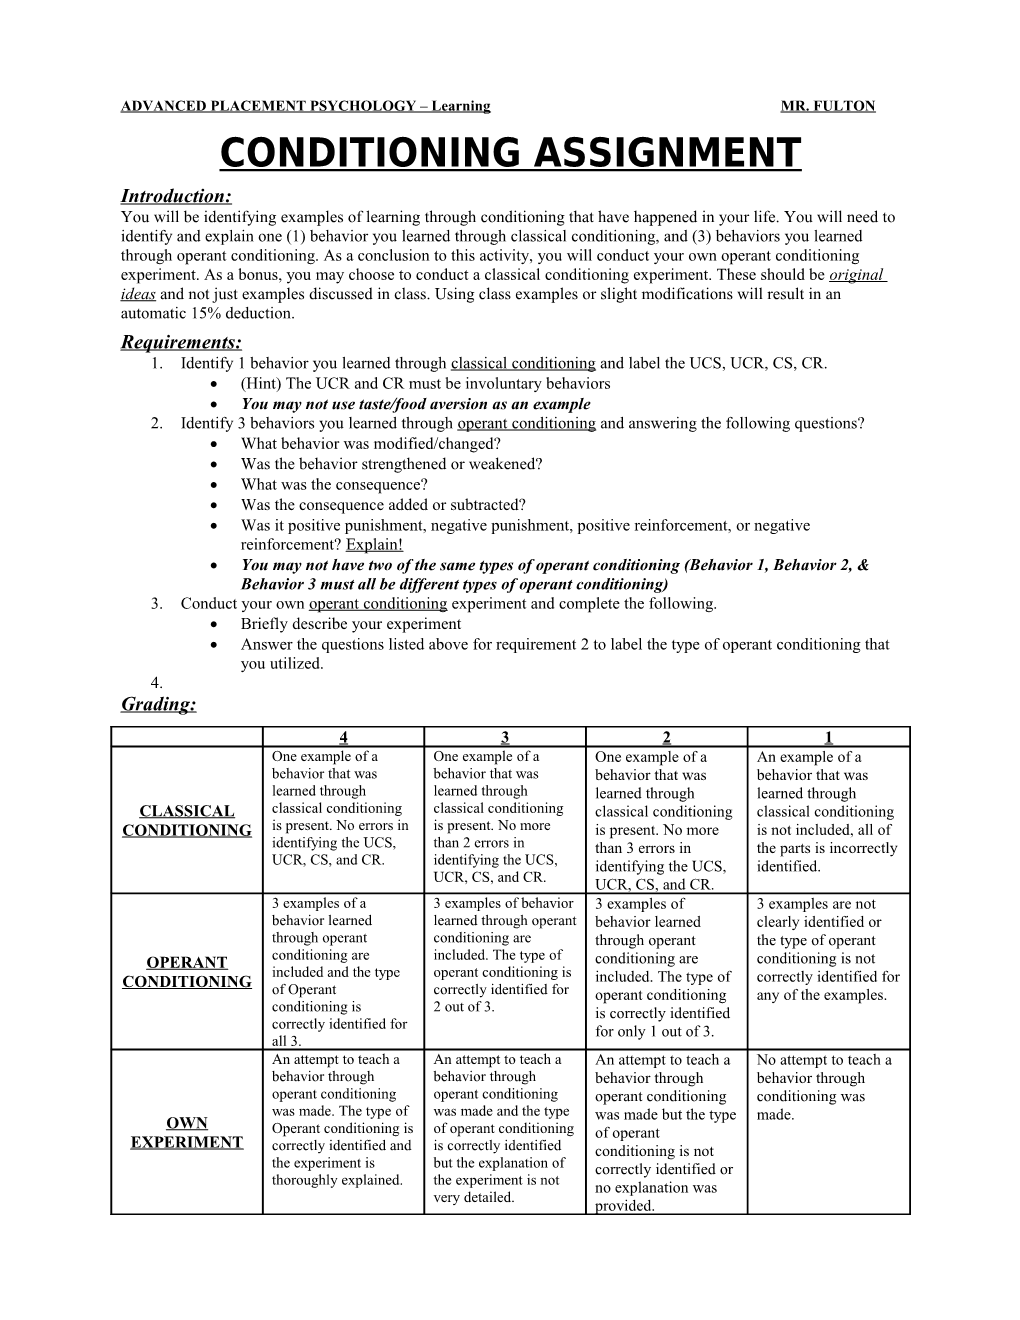 Conditioning Assignment Rubric